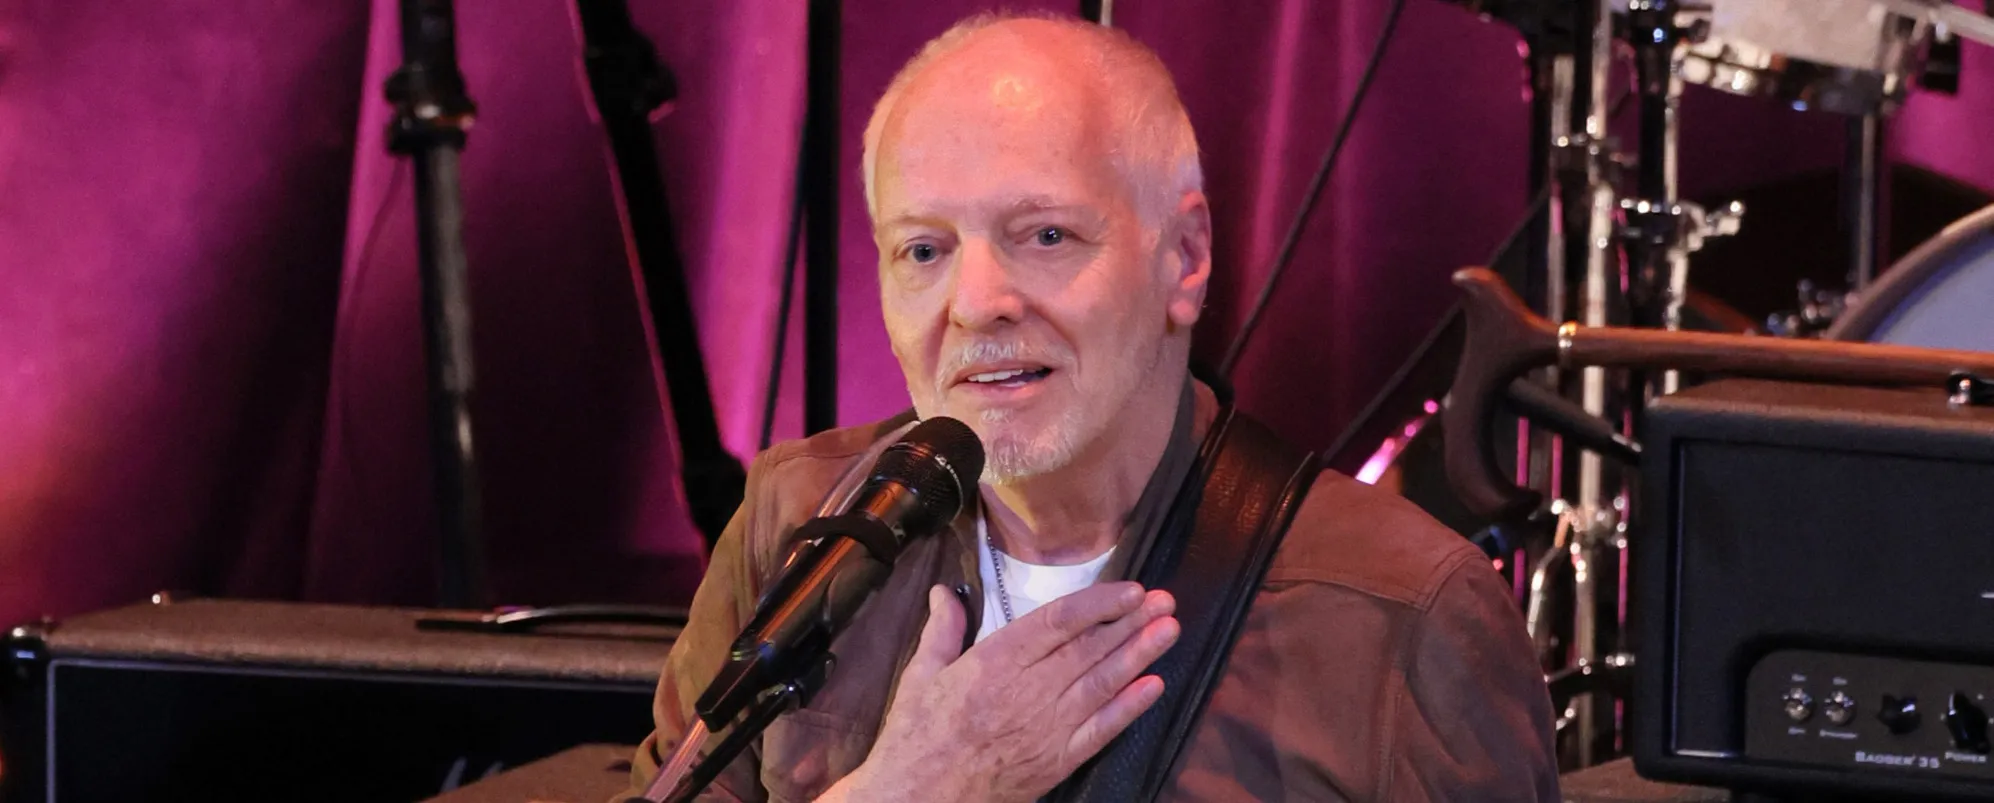 4 Songs You Didn’t Know Peter Frampton Wrote for His Classic Rock Band Humble Pie